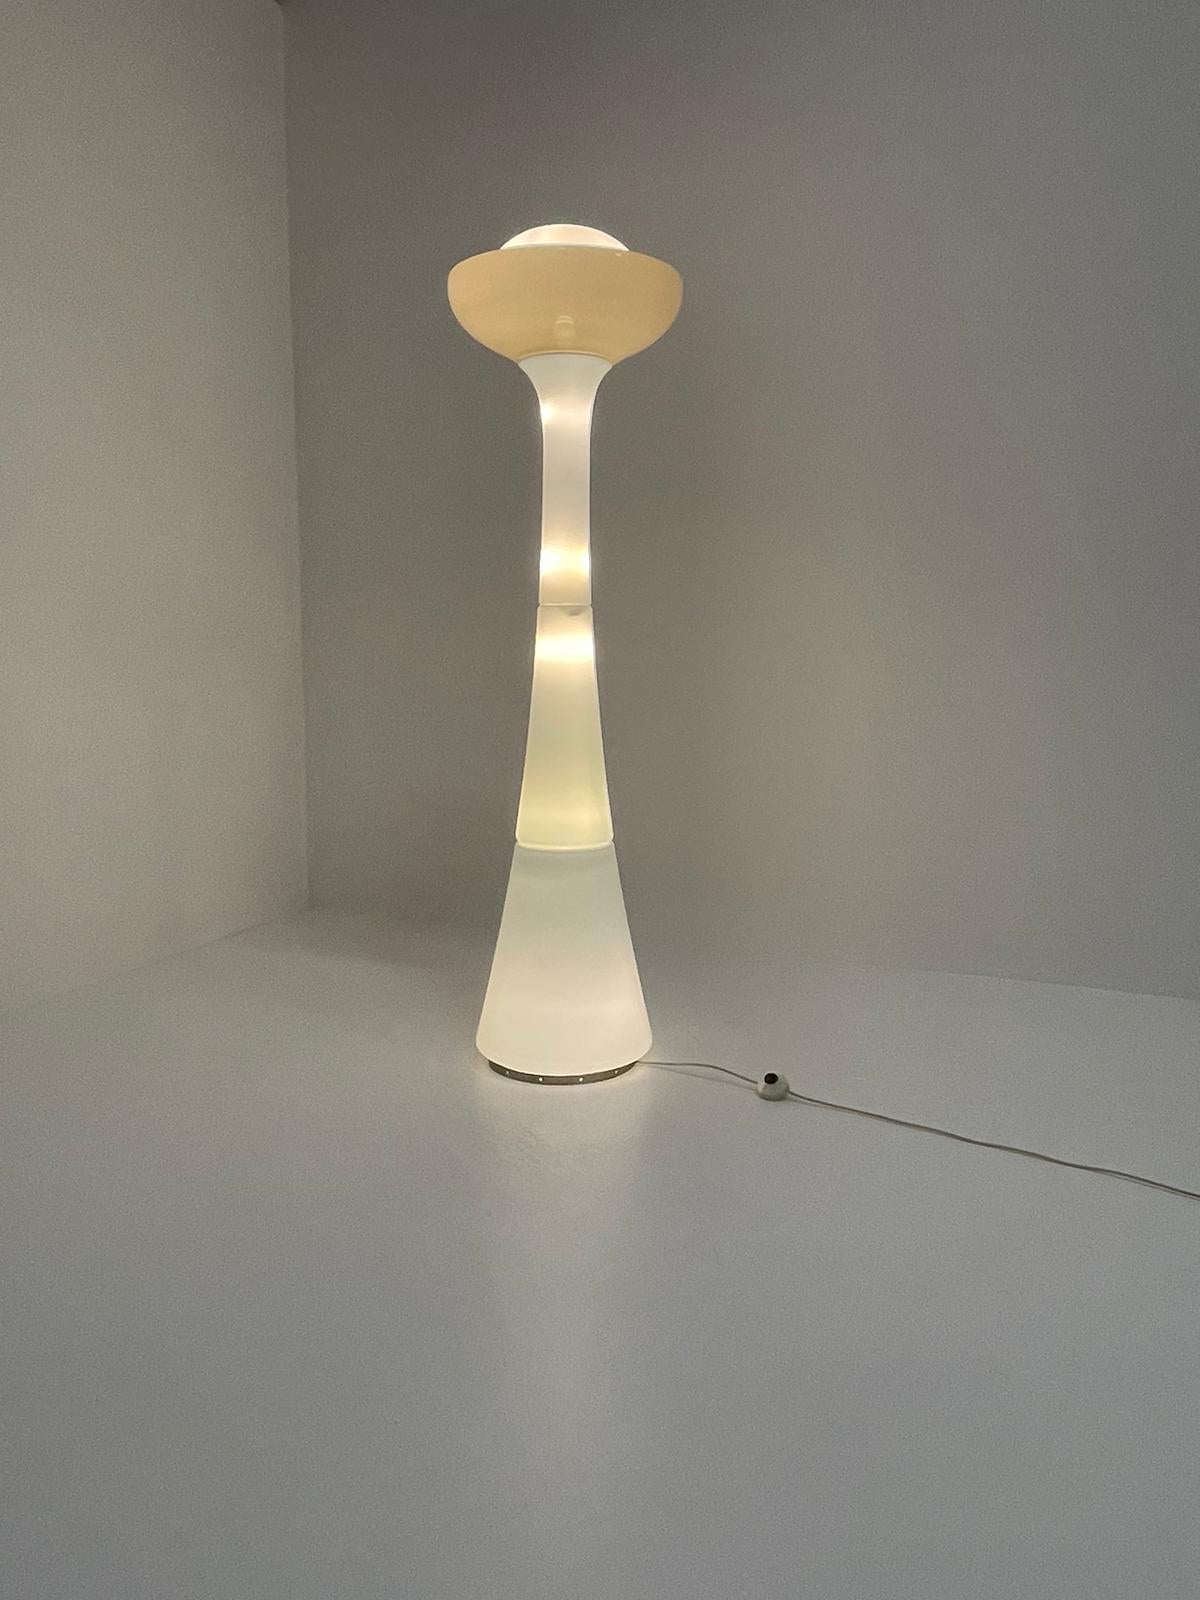 You are not looking at a floor lamp but a beautiful light sculpture created by Carlo Nason for Selenova in Italy in the 1960s.
It will create a wonderful atmosphere in the environment where you place it.
Composed of 6 elements:
4 white Murano glass,